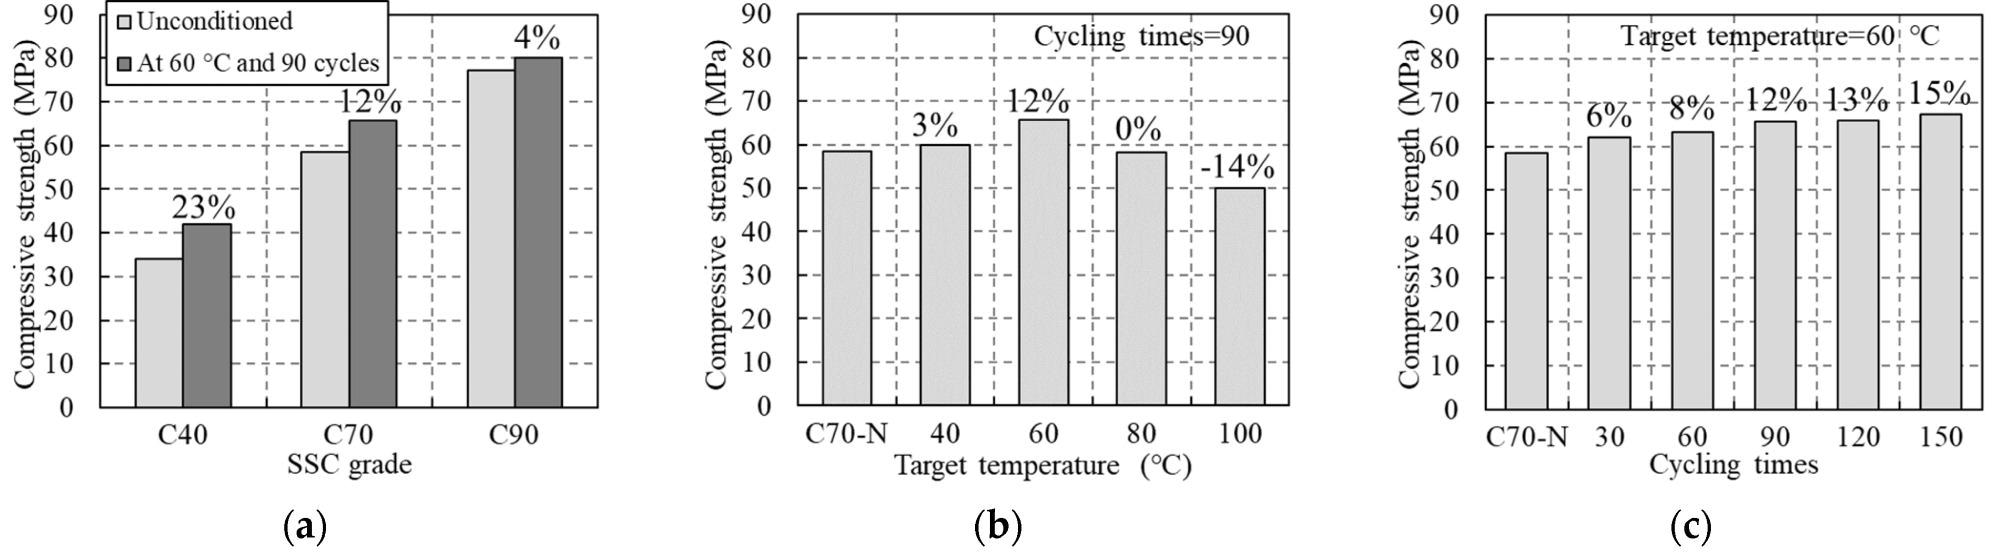 Compressive strength of SSC: (a) effects of SSC grade; (b) effects of target temperature; (c) effects of cycling times.